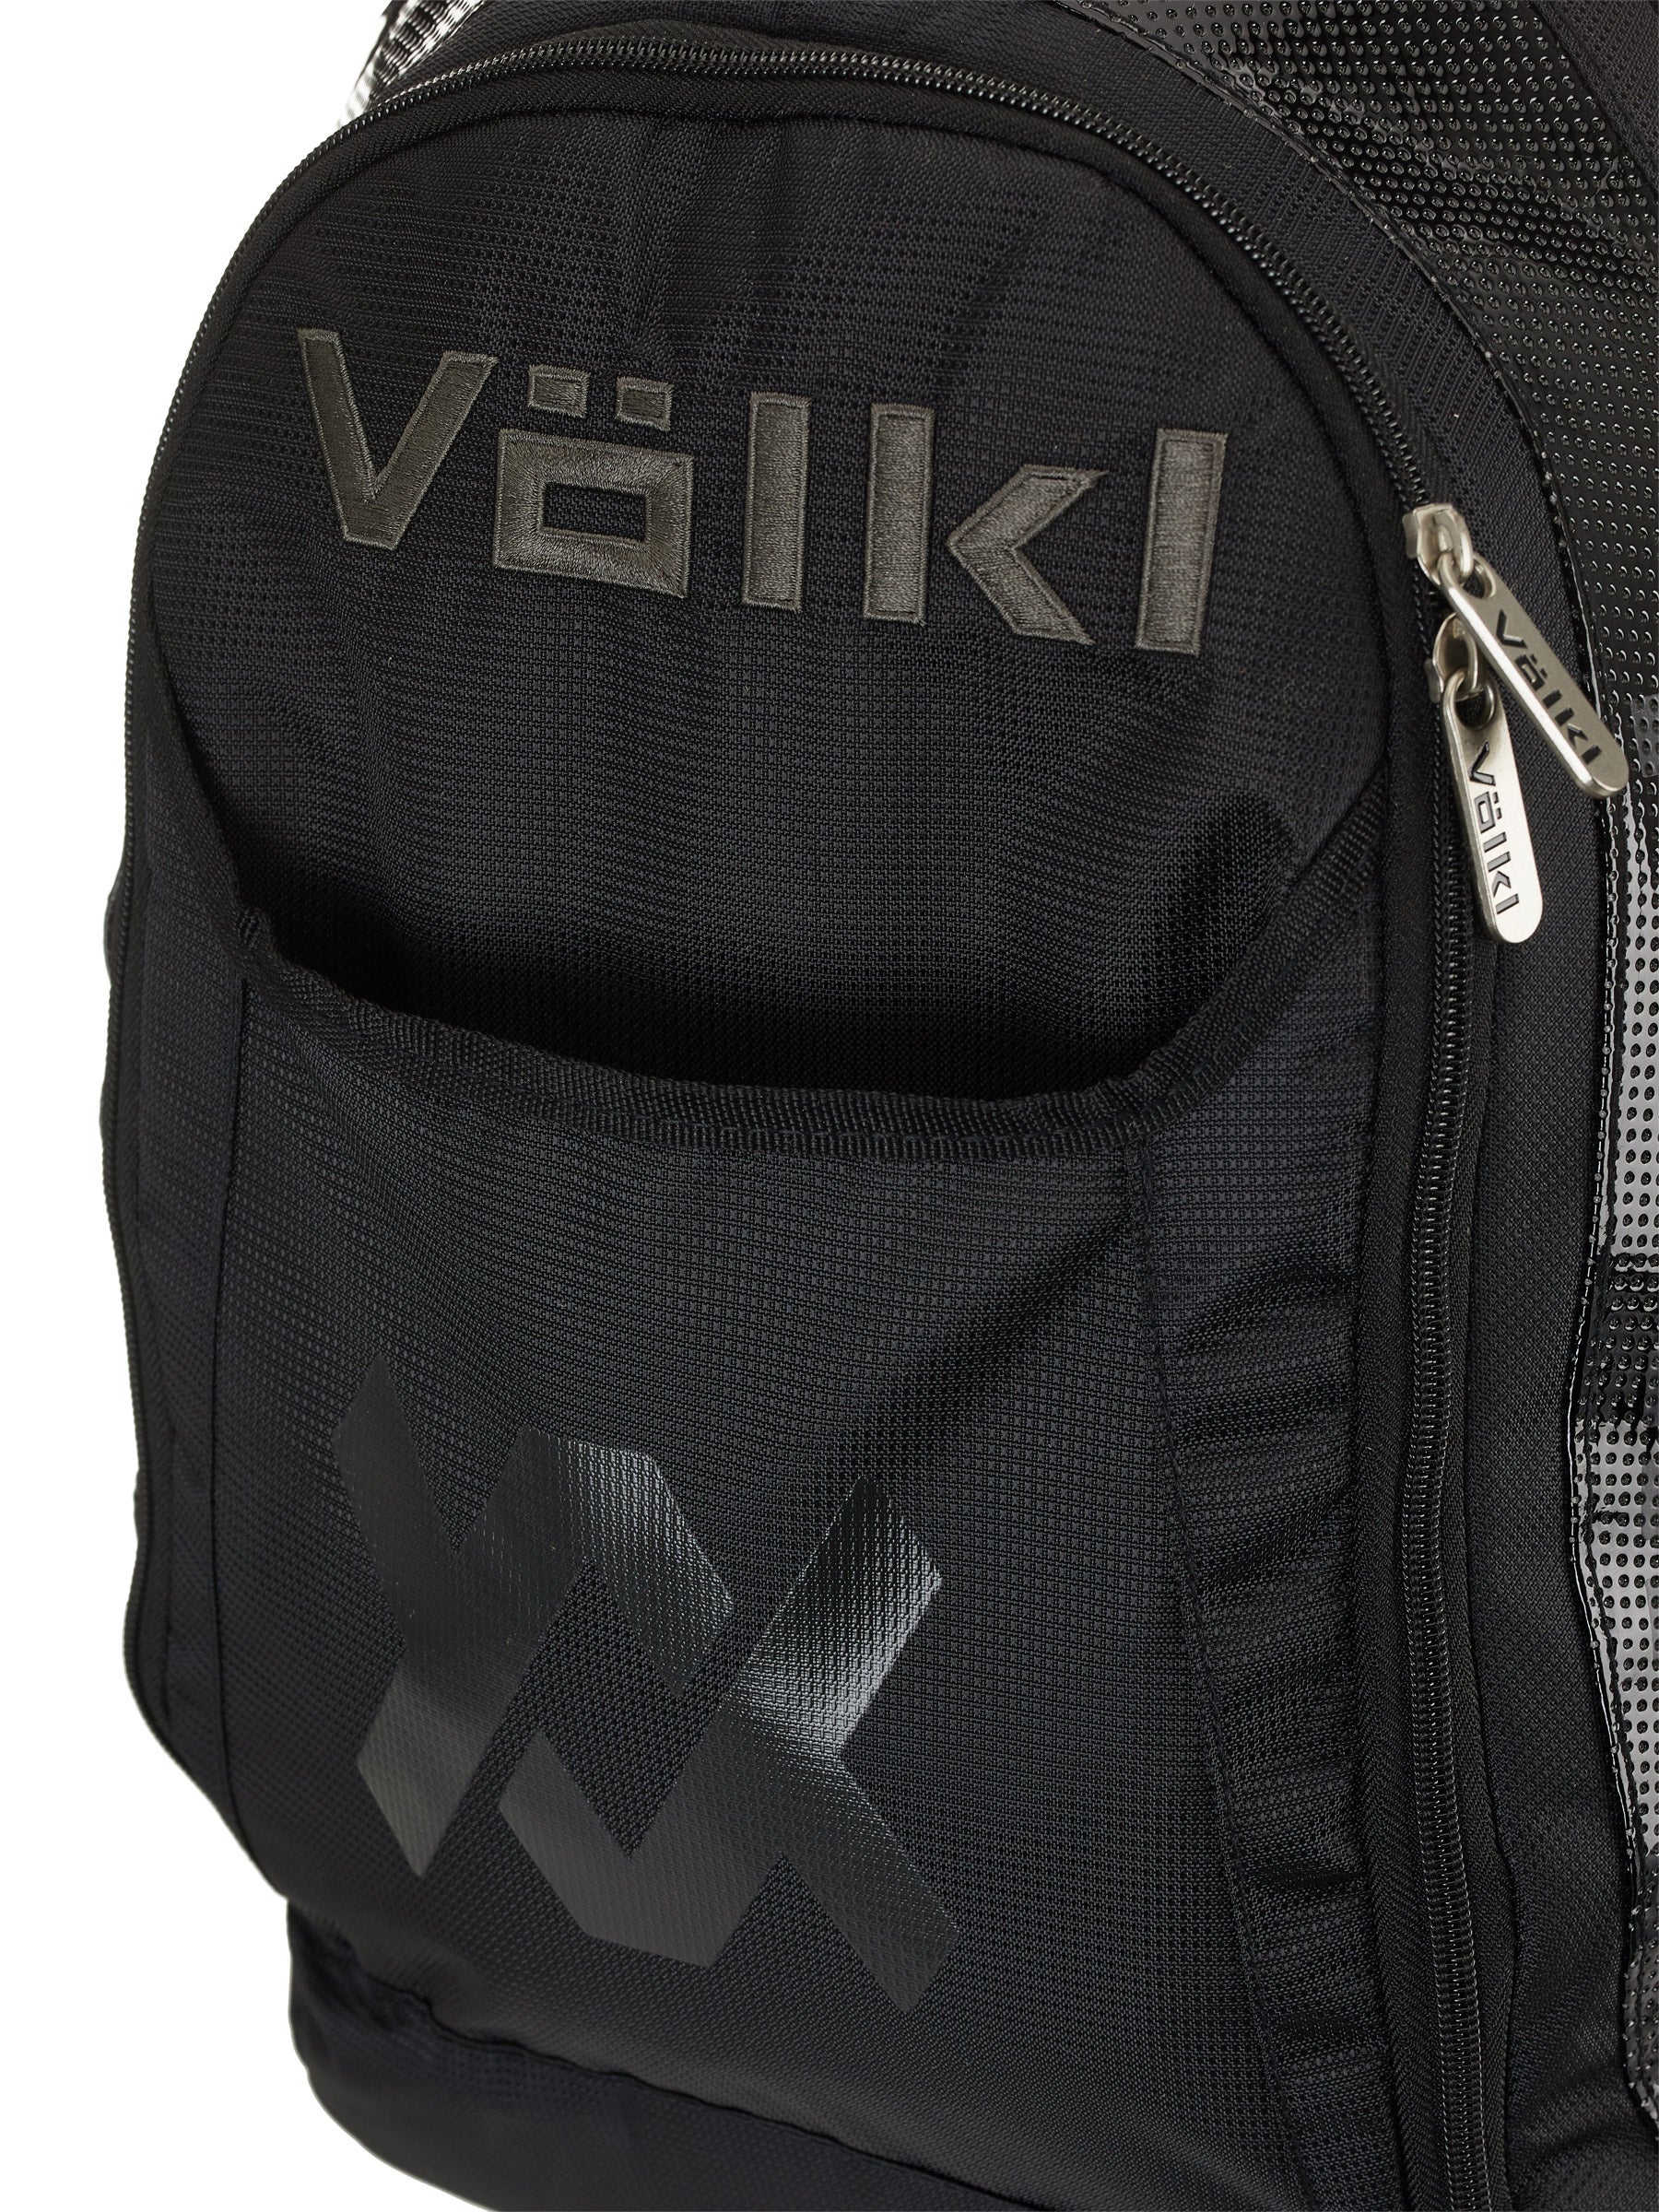 Details about   VOLKL Tennis Racquet Tour Bag with Double sided Compartments and Backpack straps 